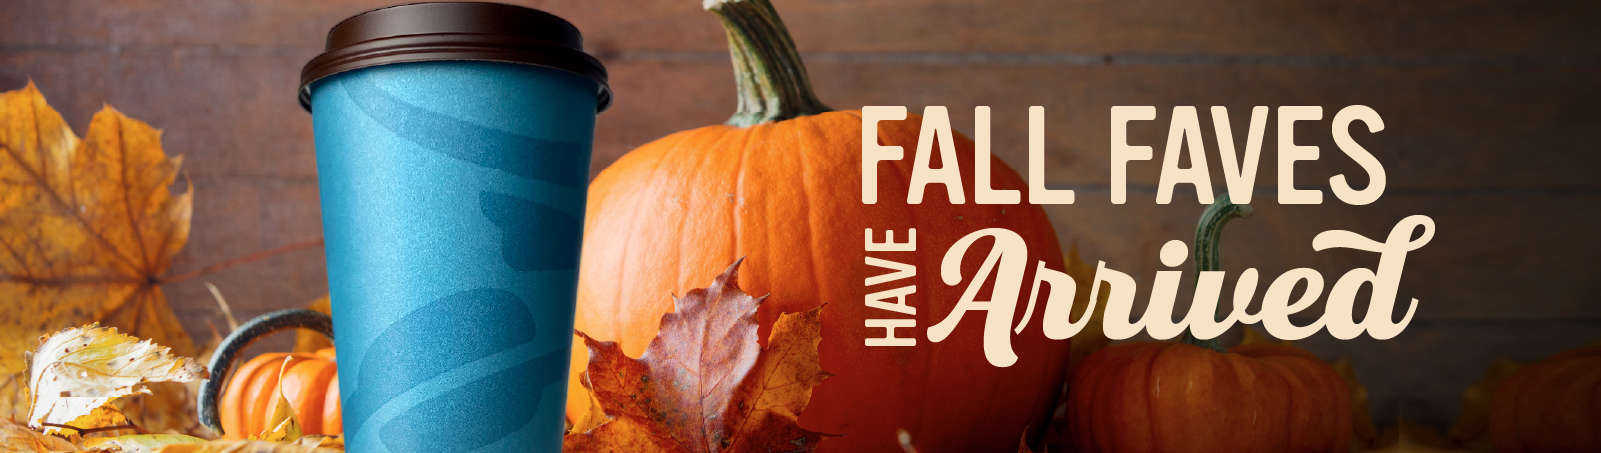 Fall flavors have arrived at caribou coffee